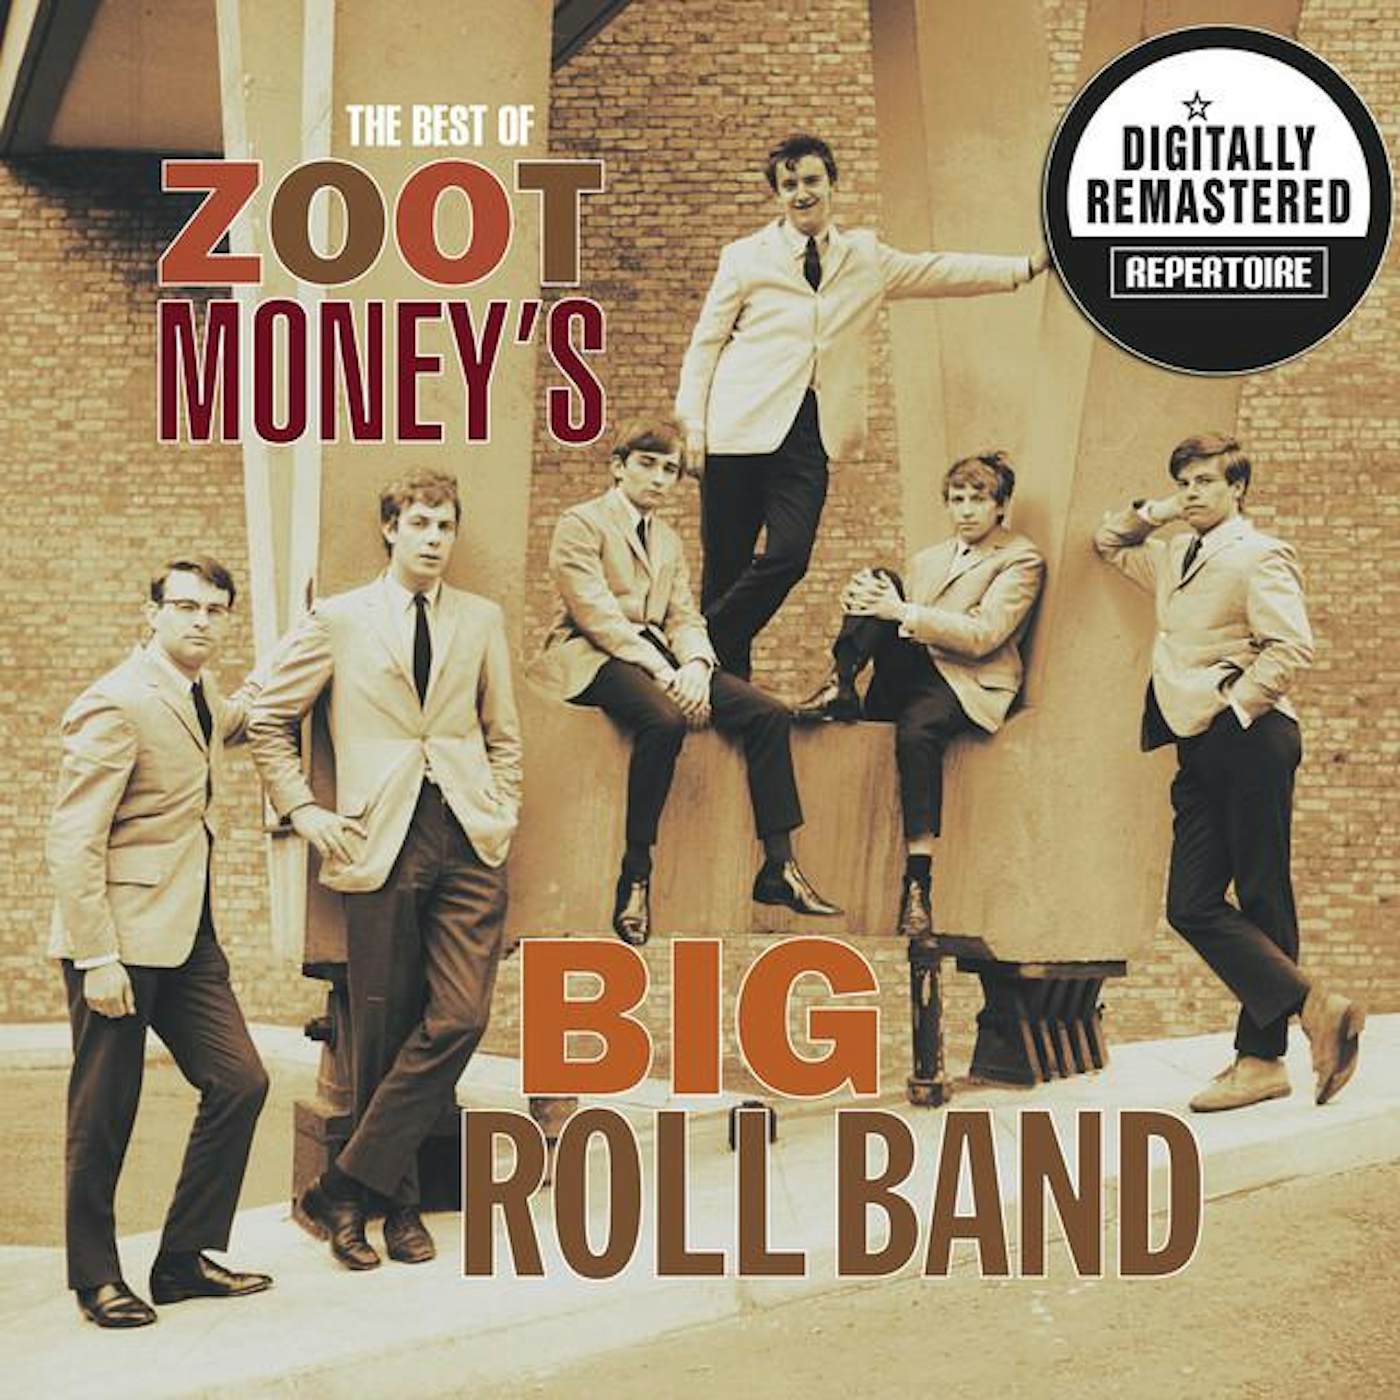 Zoot Moneys & The Big Roll Band